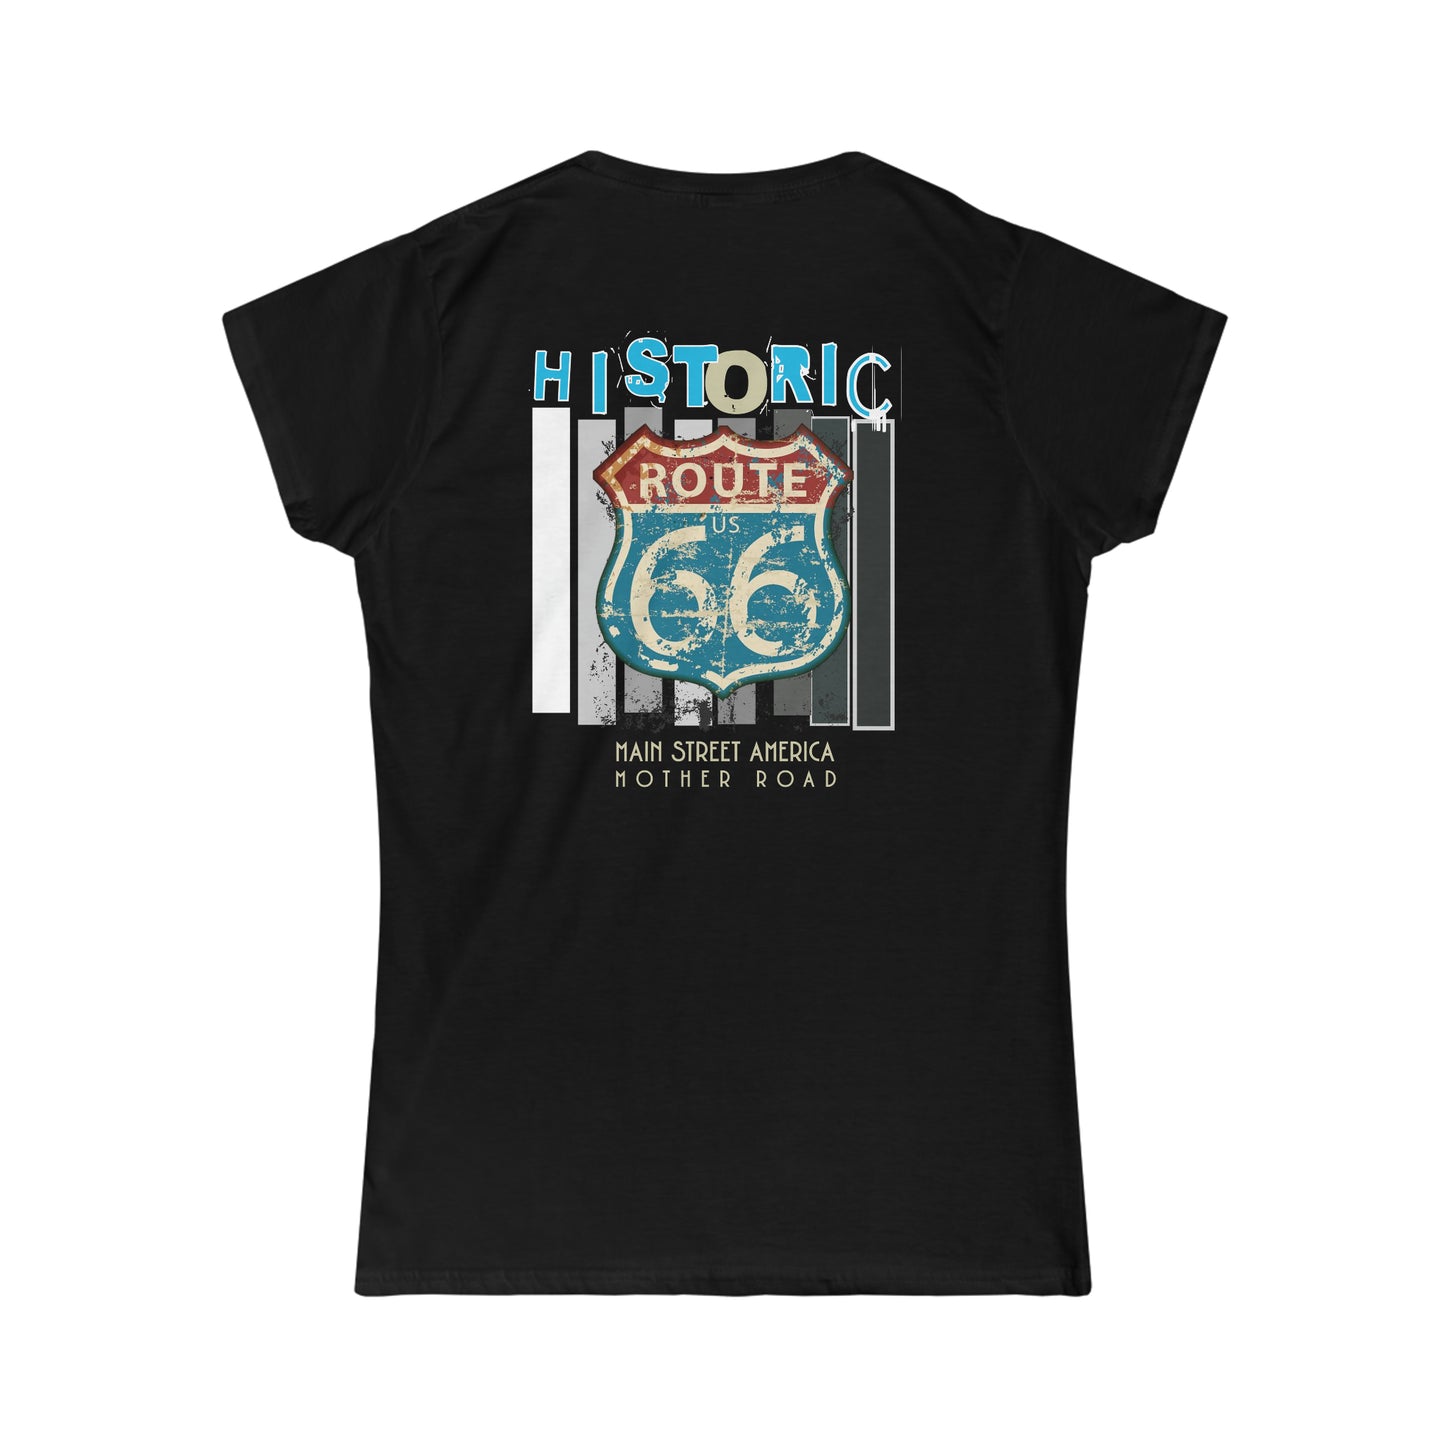 HISTORIC ROUTE 66,  Women's Softstyle Tee